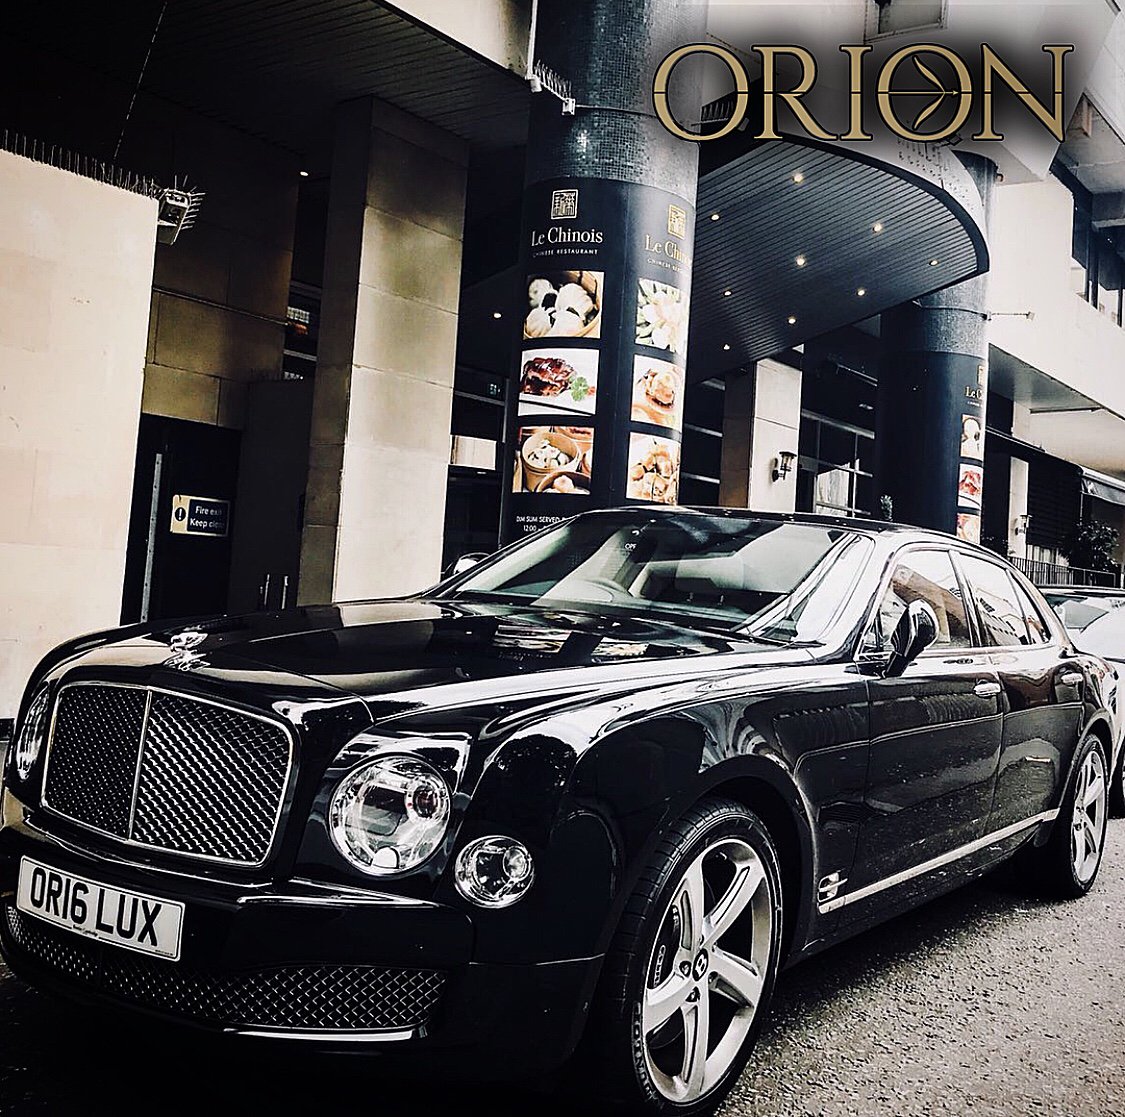 Whilst the sun is still out ☀️, why not take advantage of our discounted Summer rates. Call us today for your luxury chauffeured solution.

#london #luxury #luxurylife #knightsbridge #chelsea #bentley #rollsroyce #chauffeur #luxurychauffeur #ferrari #lamborghini #summer2018